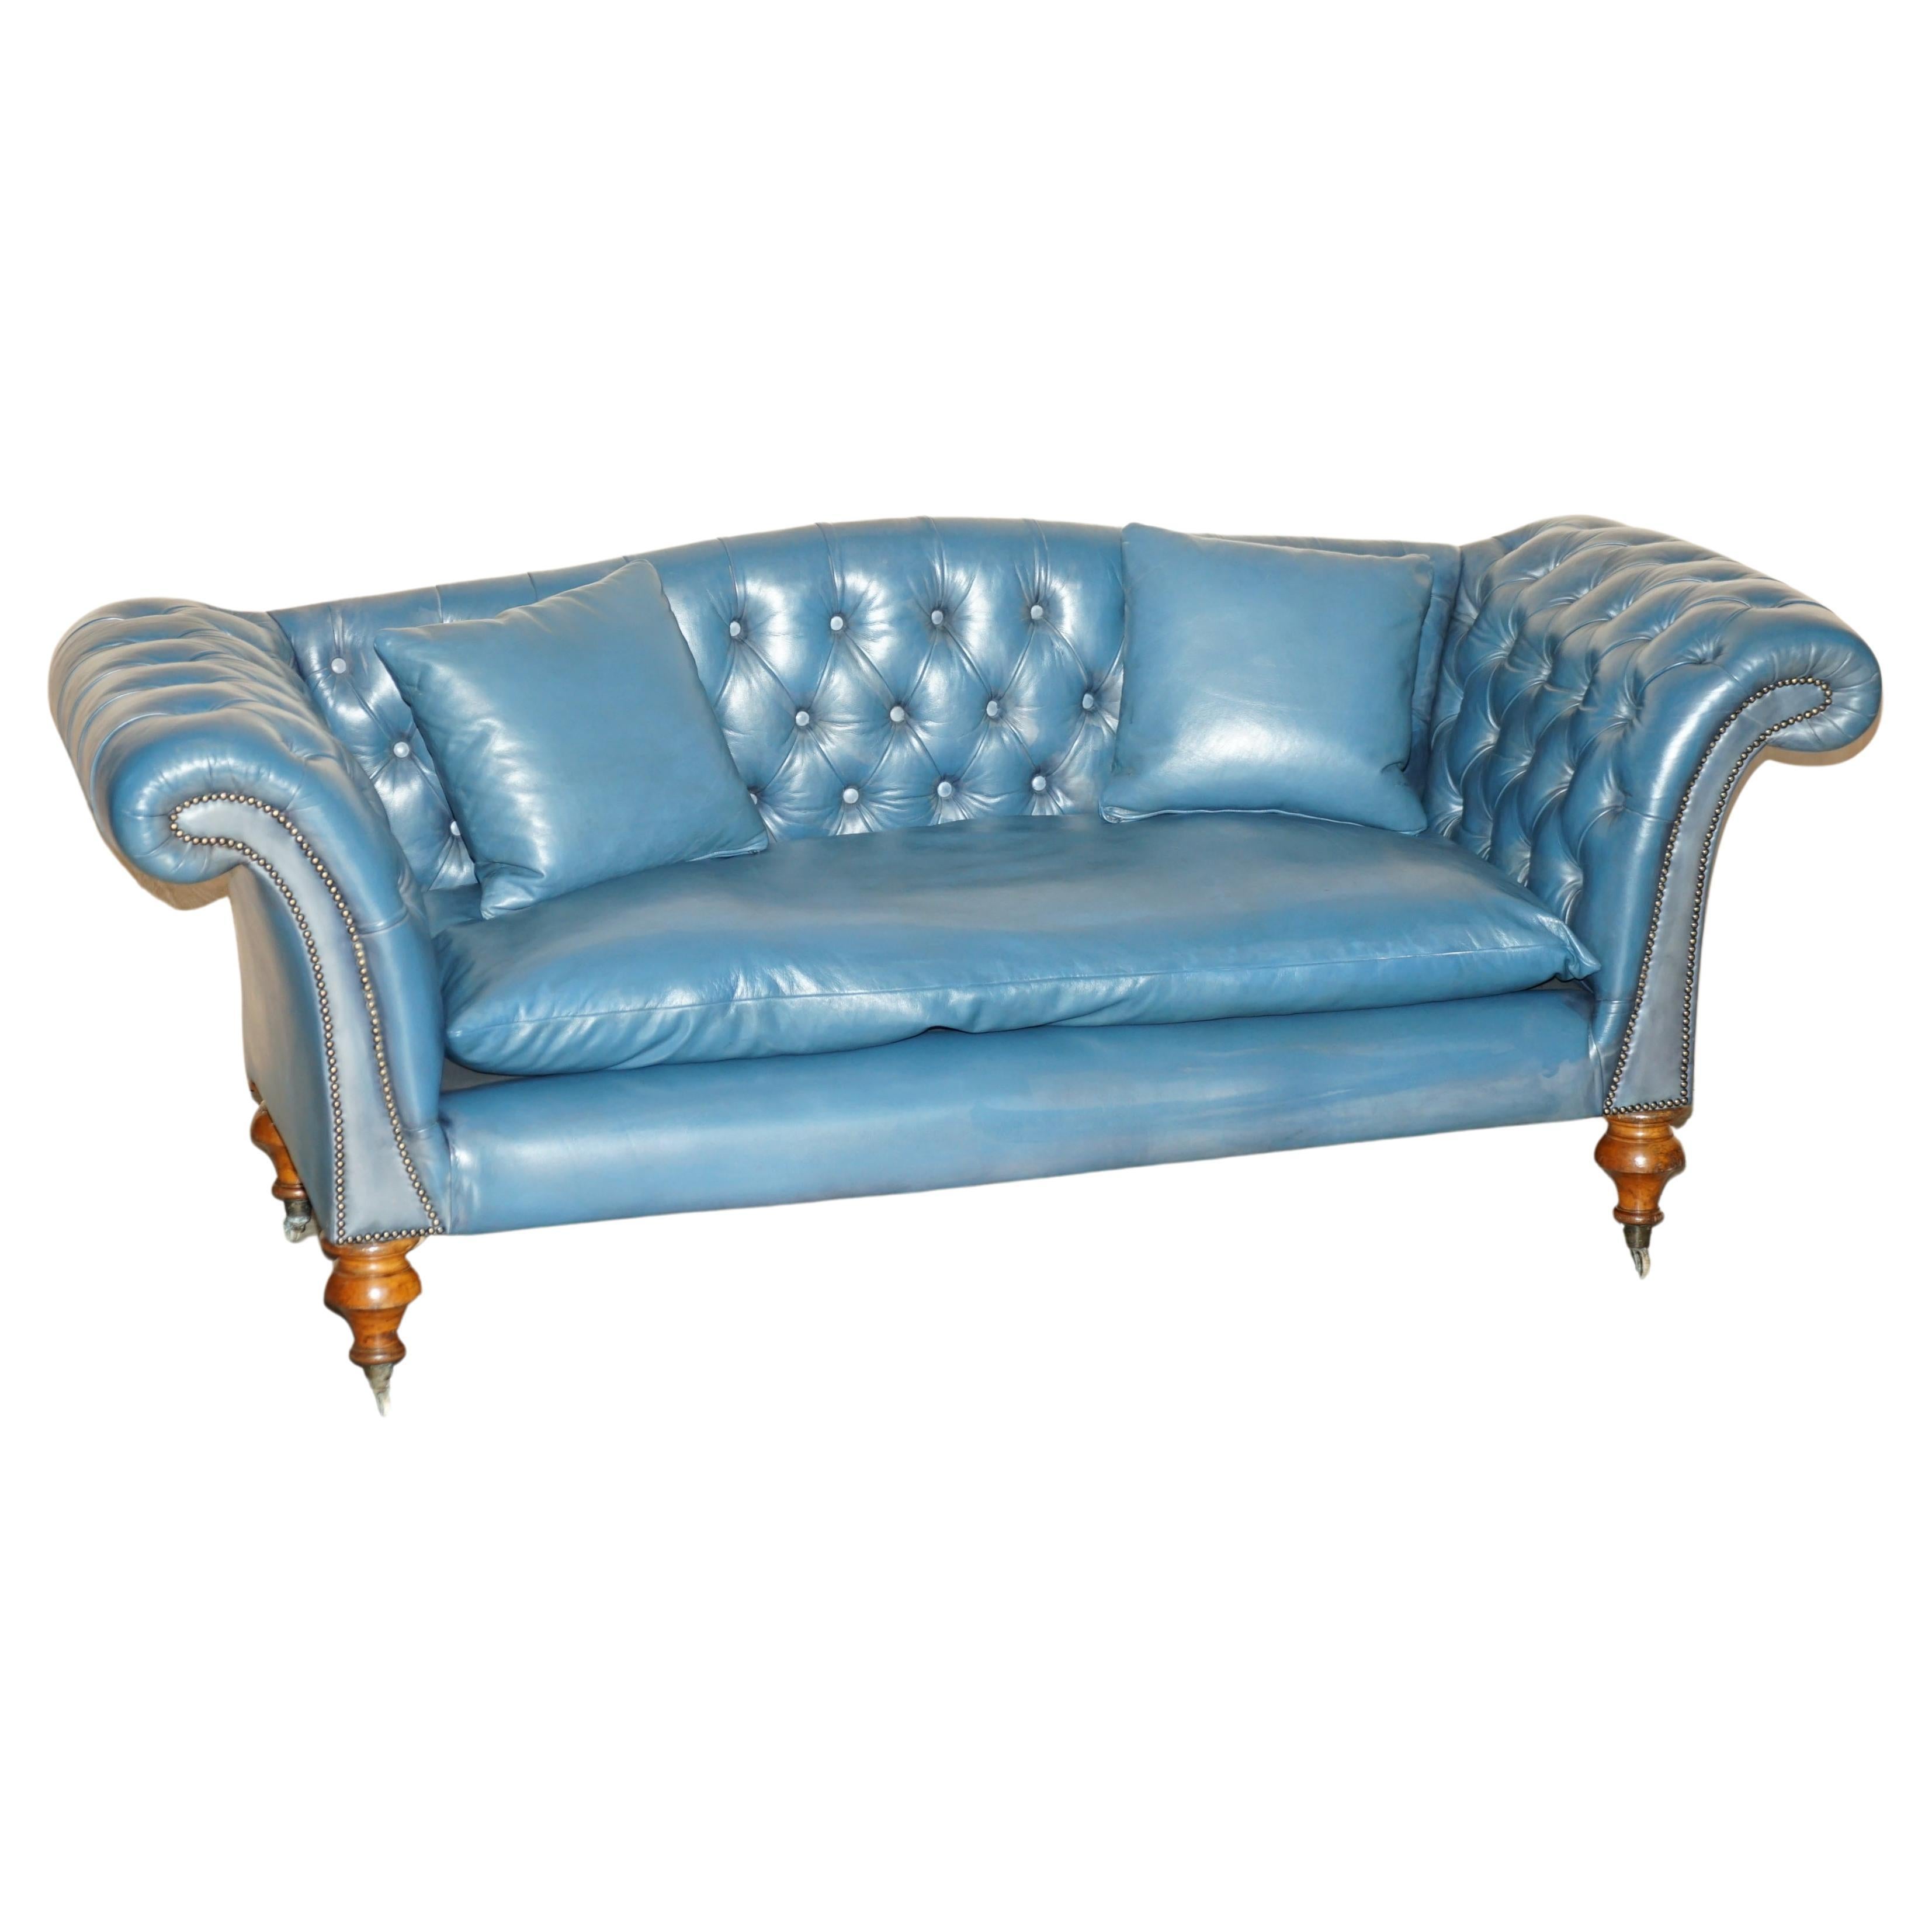 RESTORED WILLIAM IV CIRCA 1830 CHESTERFiELD REGENCY BLUE LEATHER HUMP BACK SOFA For Sale